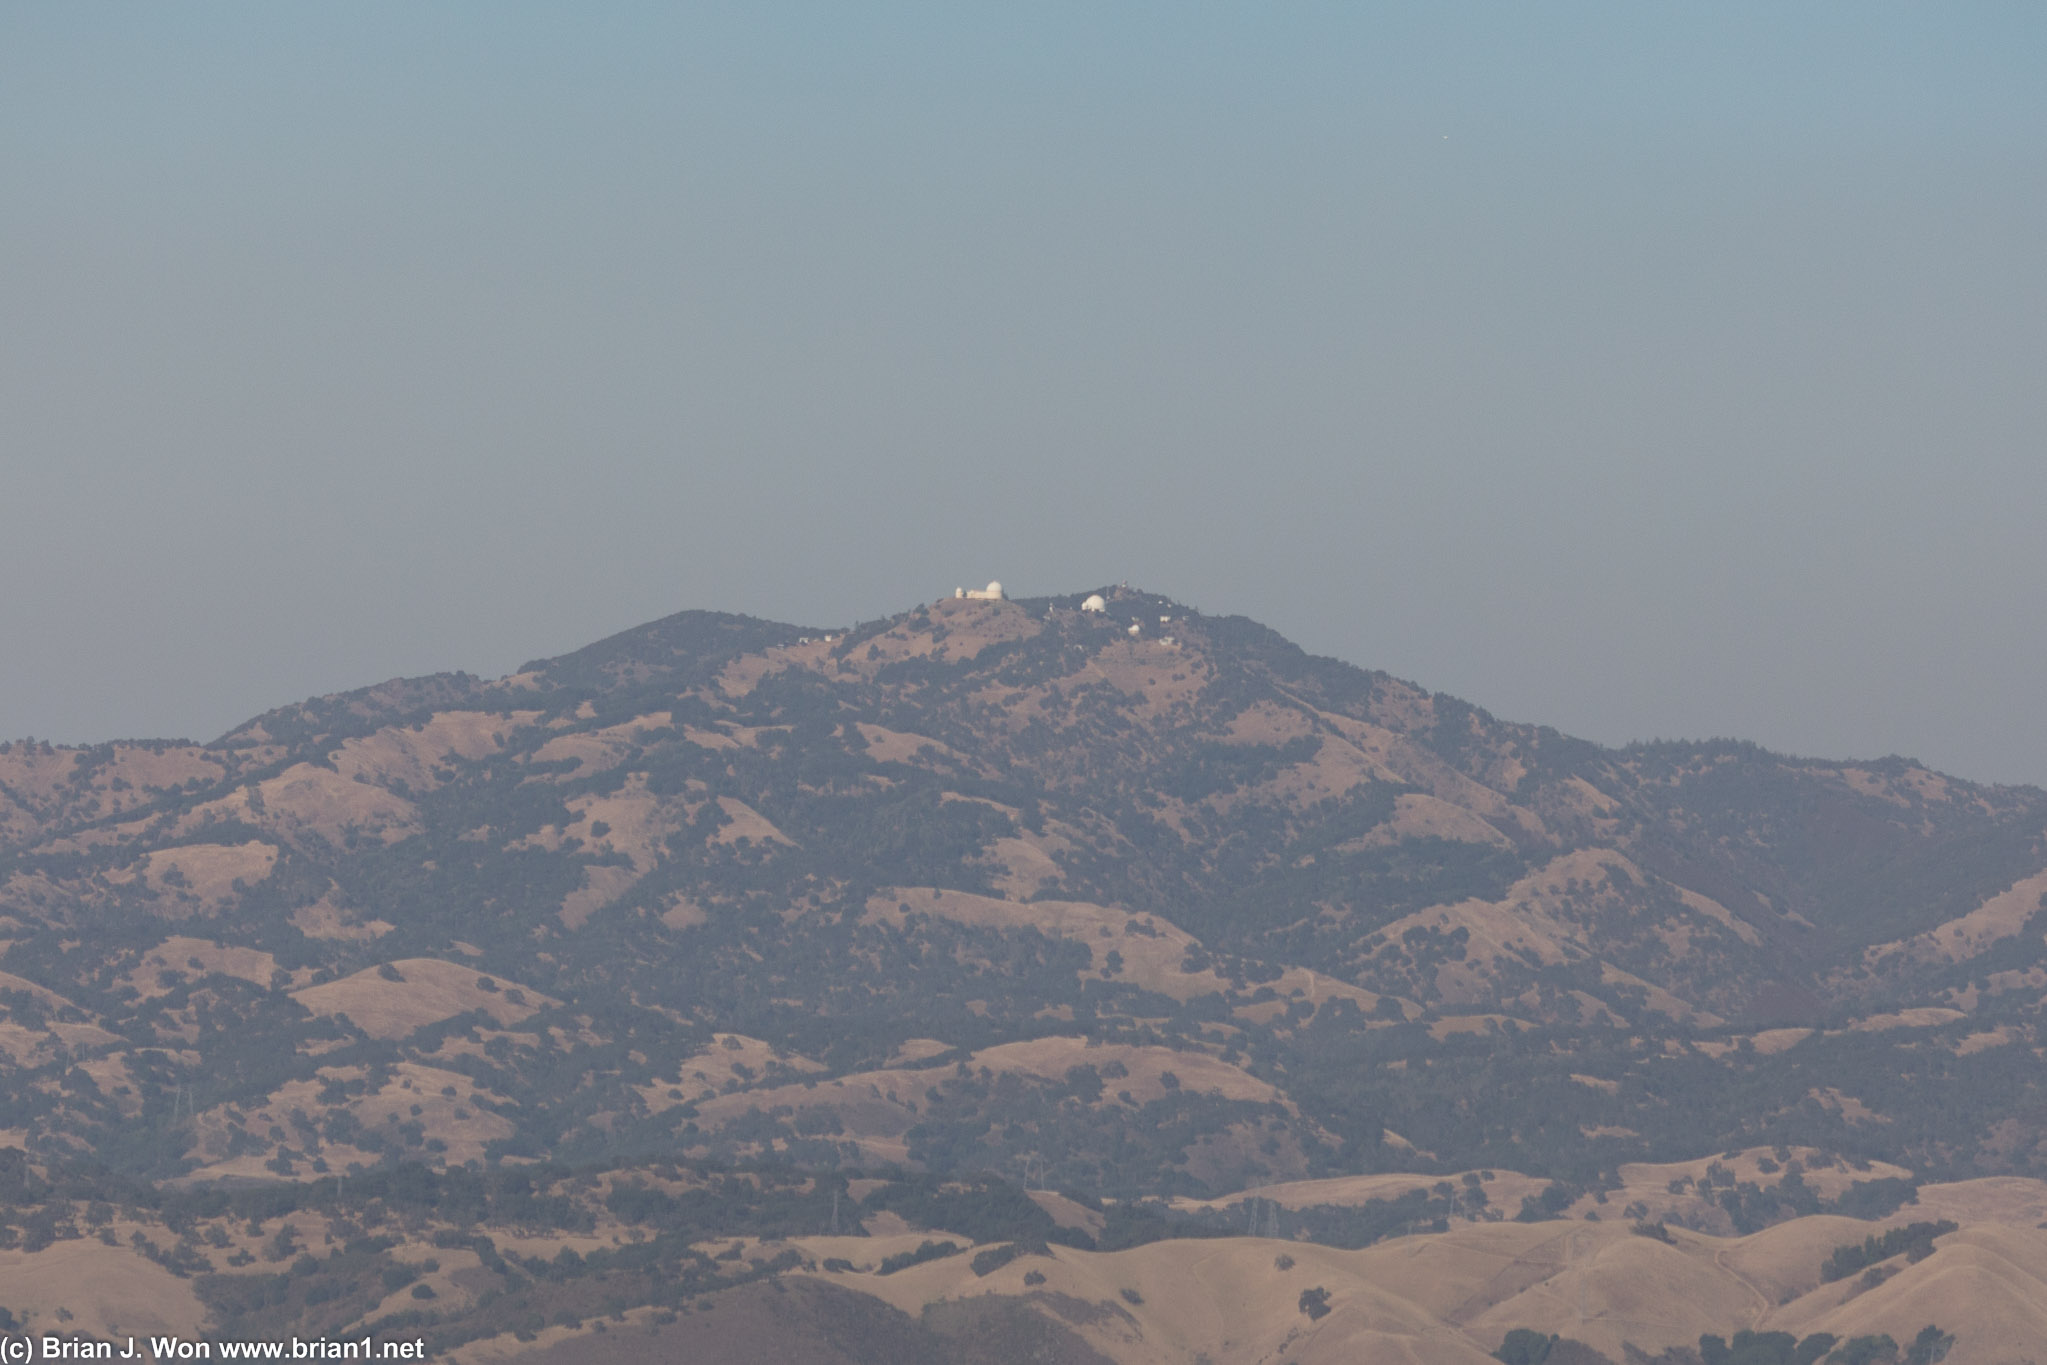 Lick Observatory to the east of SJC on final approach.